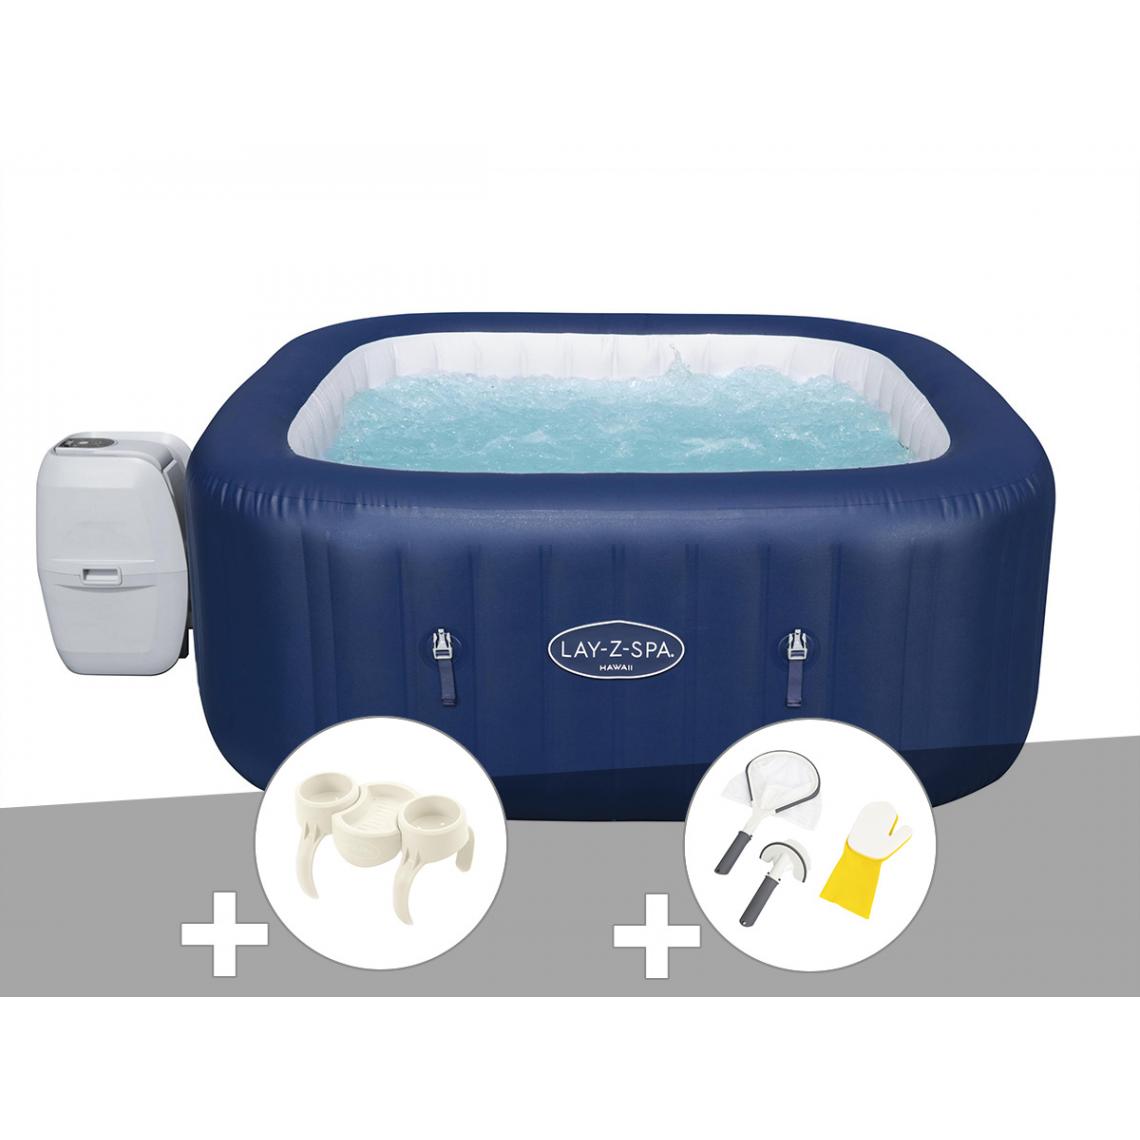 Bestway - Kit spa gonflable Bestway Lay-Z-Spa Hawaii carré Airjet 4/6 places + Porte-gobelets + Kit de nettoyage - Spa gonflable